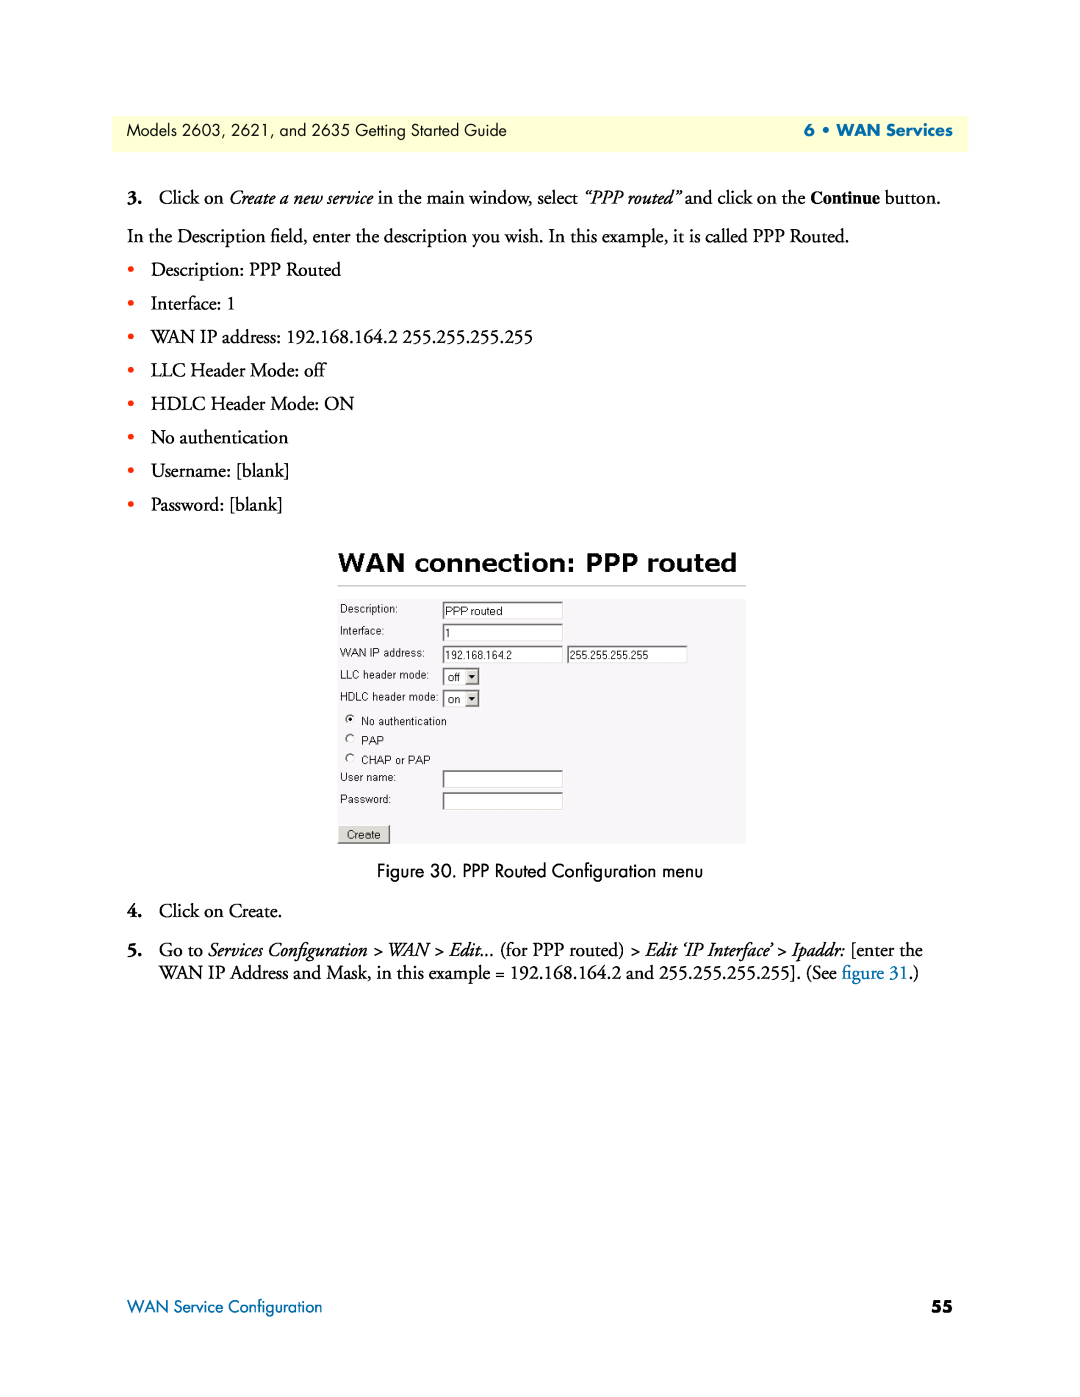 Patton electronic 2635, 2621 manual Description PPP Routed Interface WAN IP address 192.168.164.2 